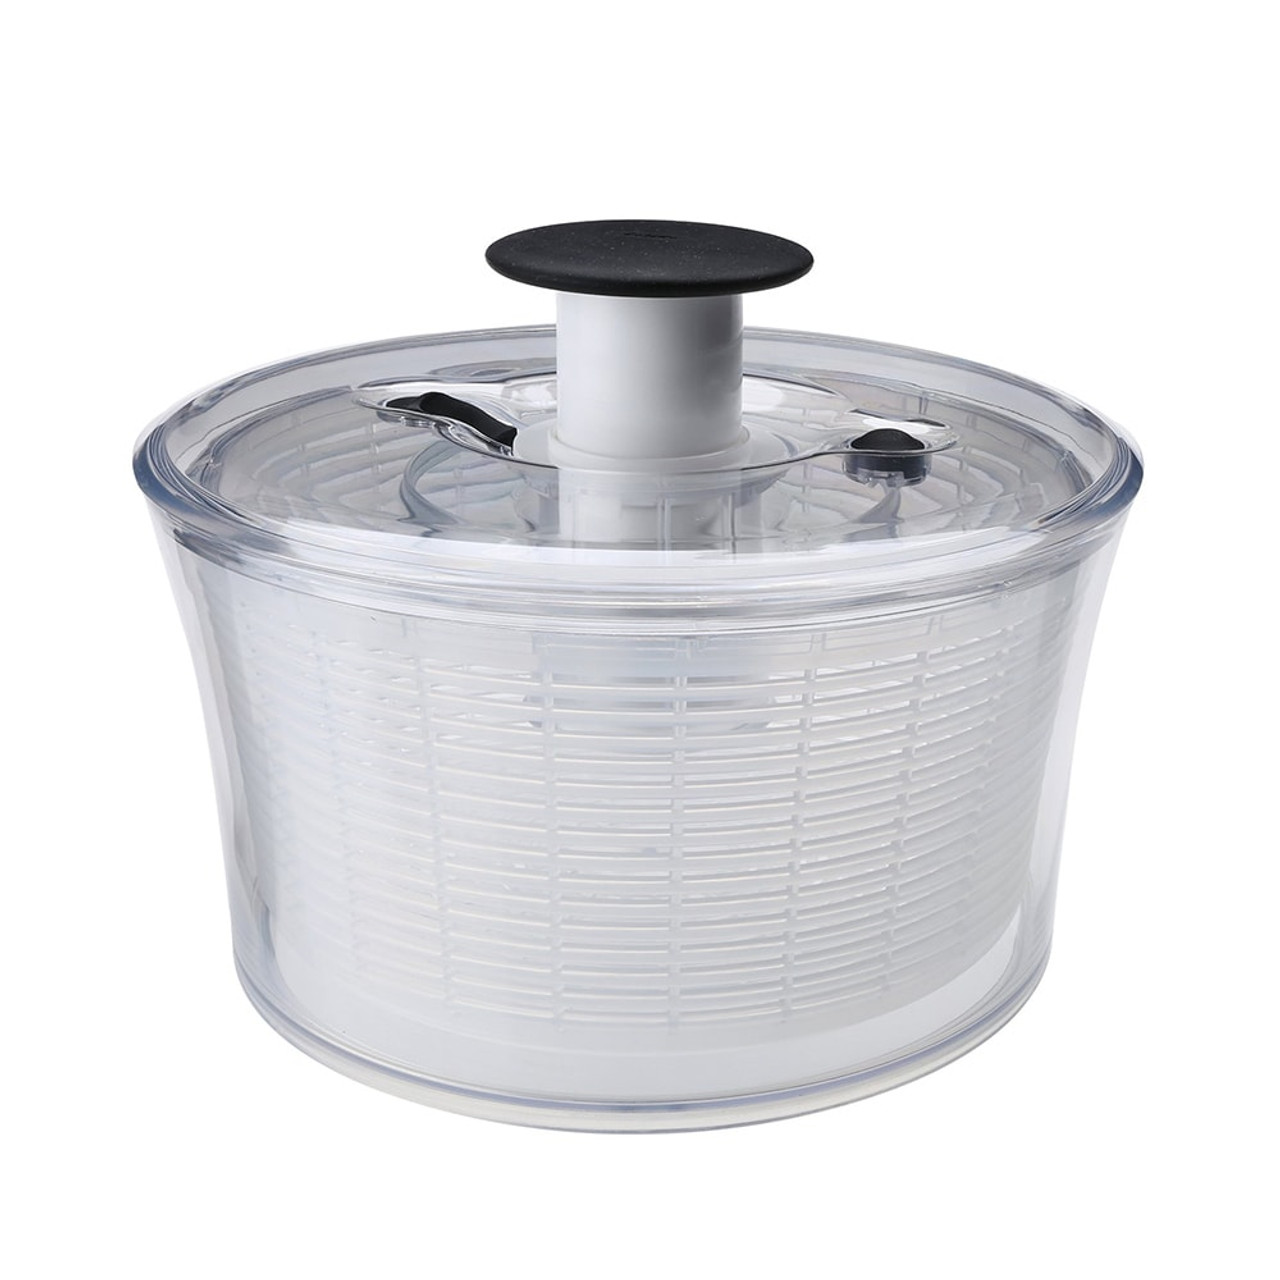 OXO SteeL Stainless Steel Classic Salad Spinner NEW